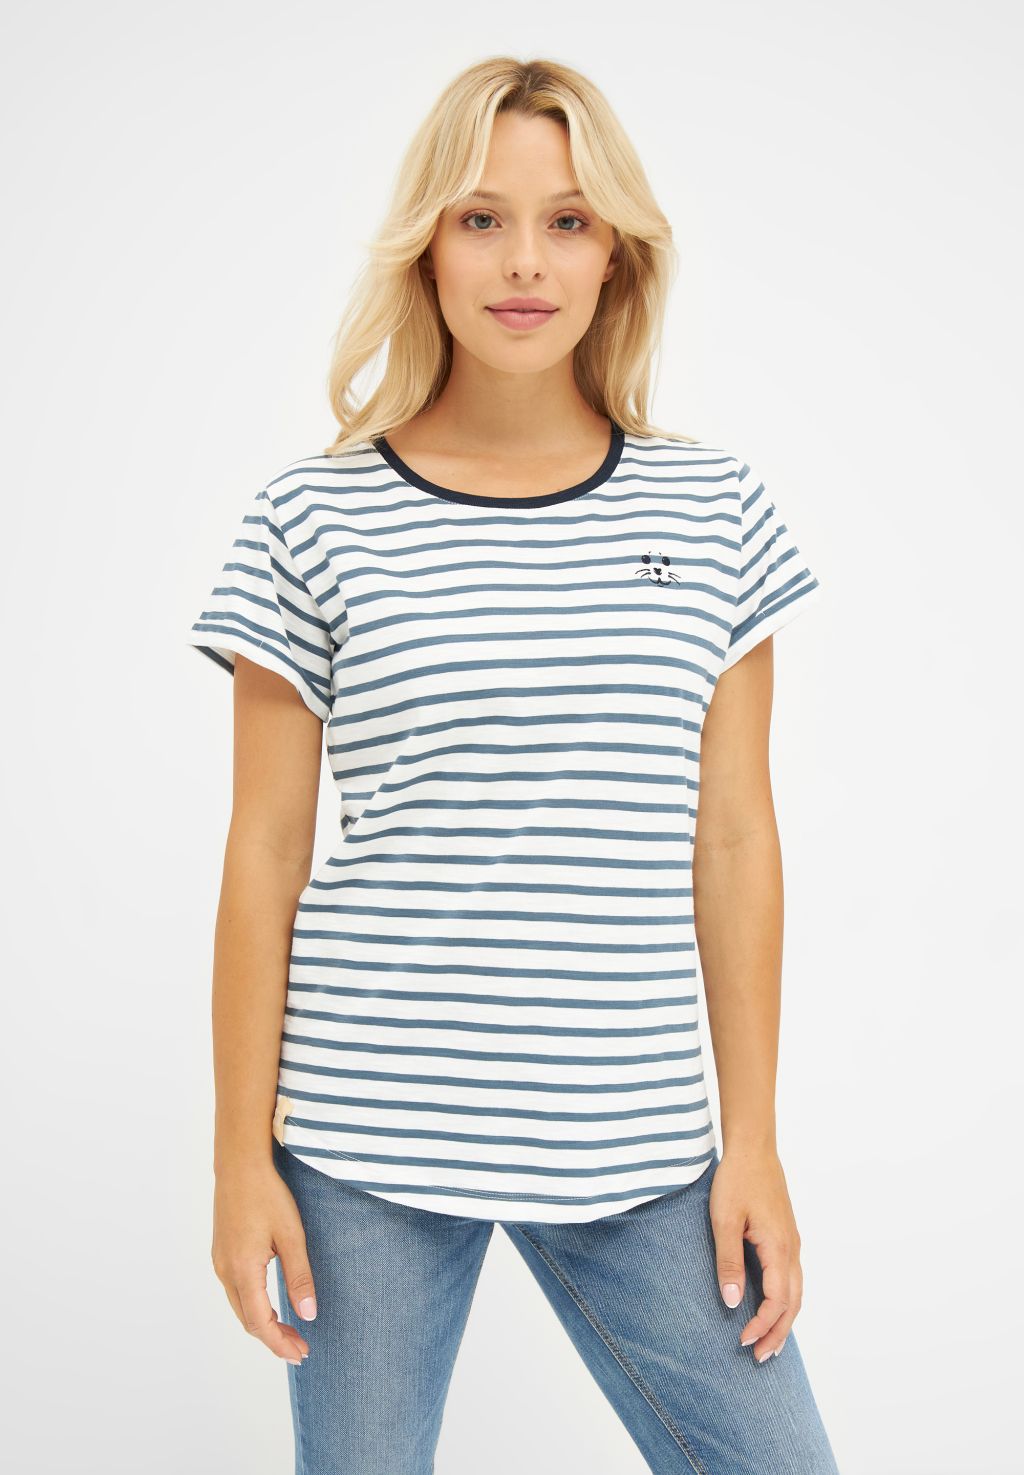 T-Shirt Robbenschnute Striped Orion Blue XS